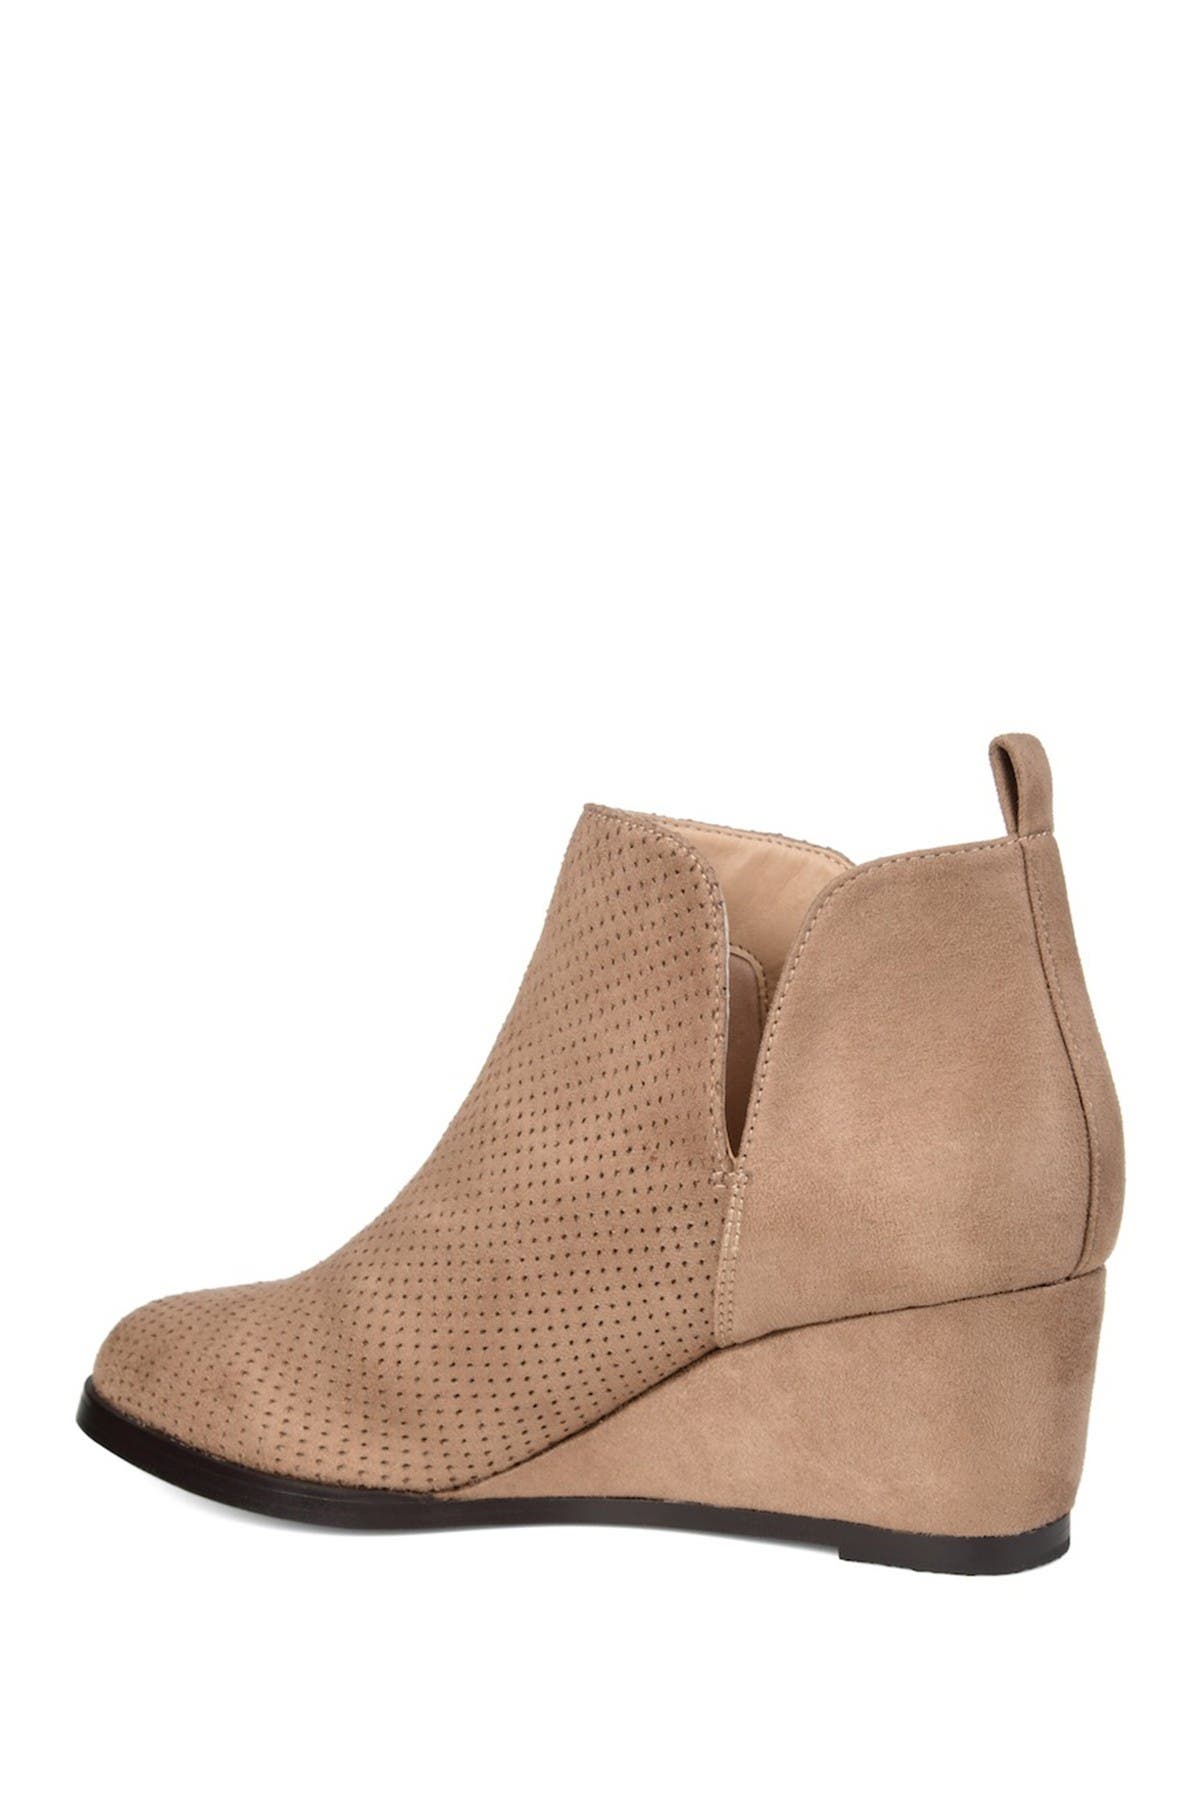 perforated wedge booties